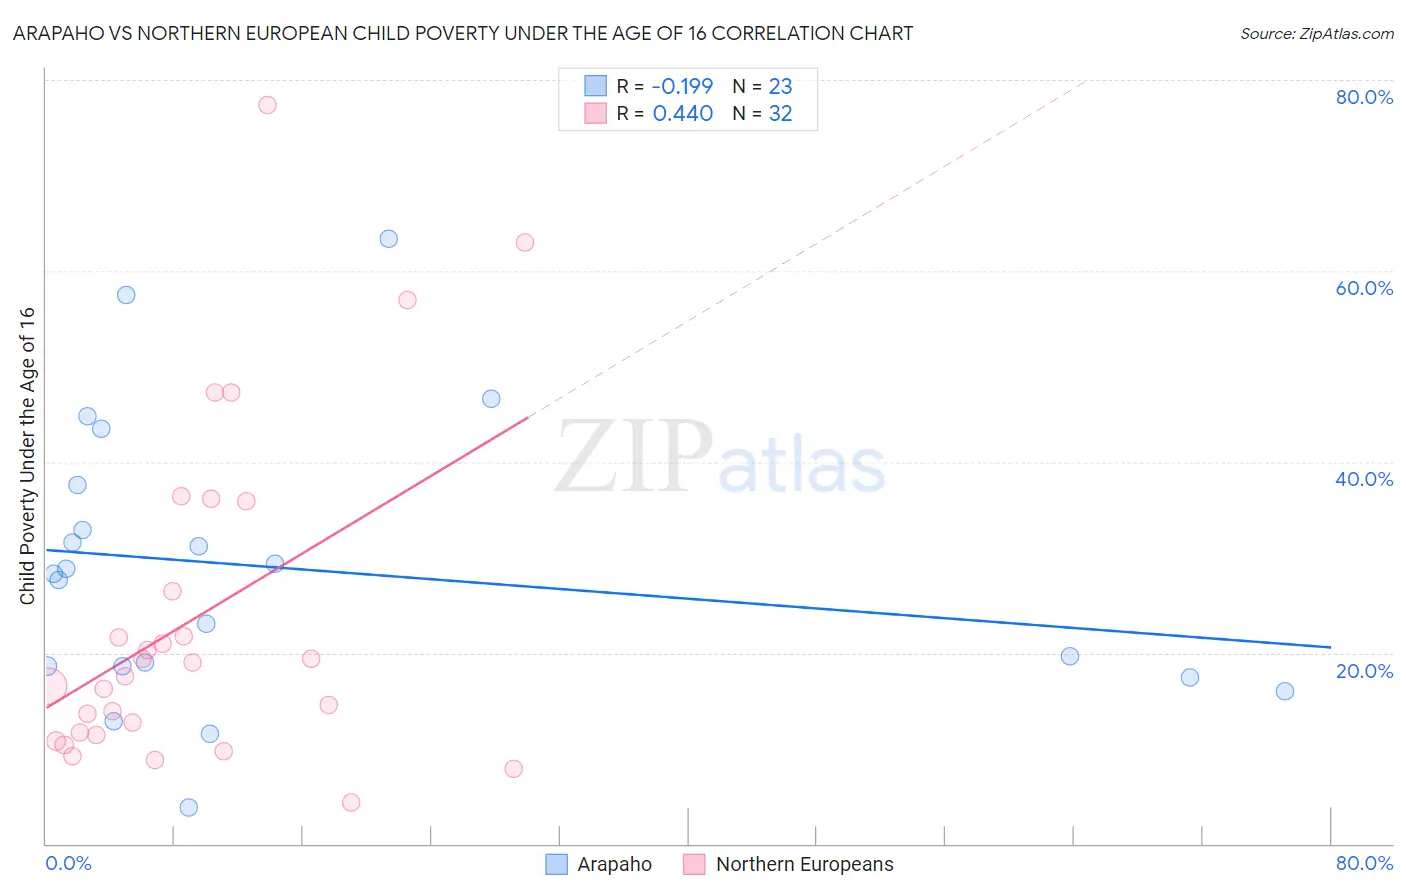 Arapaho vs Northern European Child Poverty Under the Age of 16